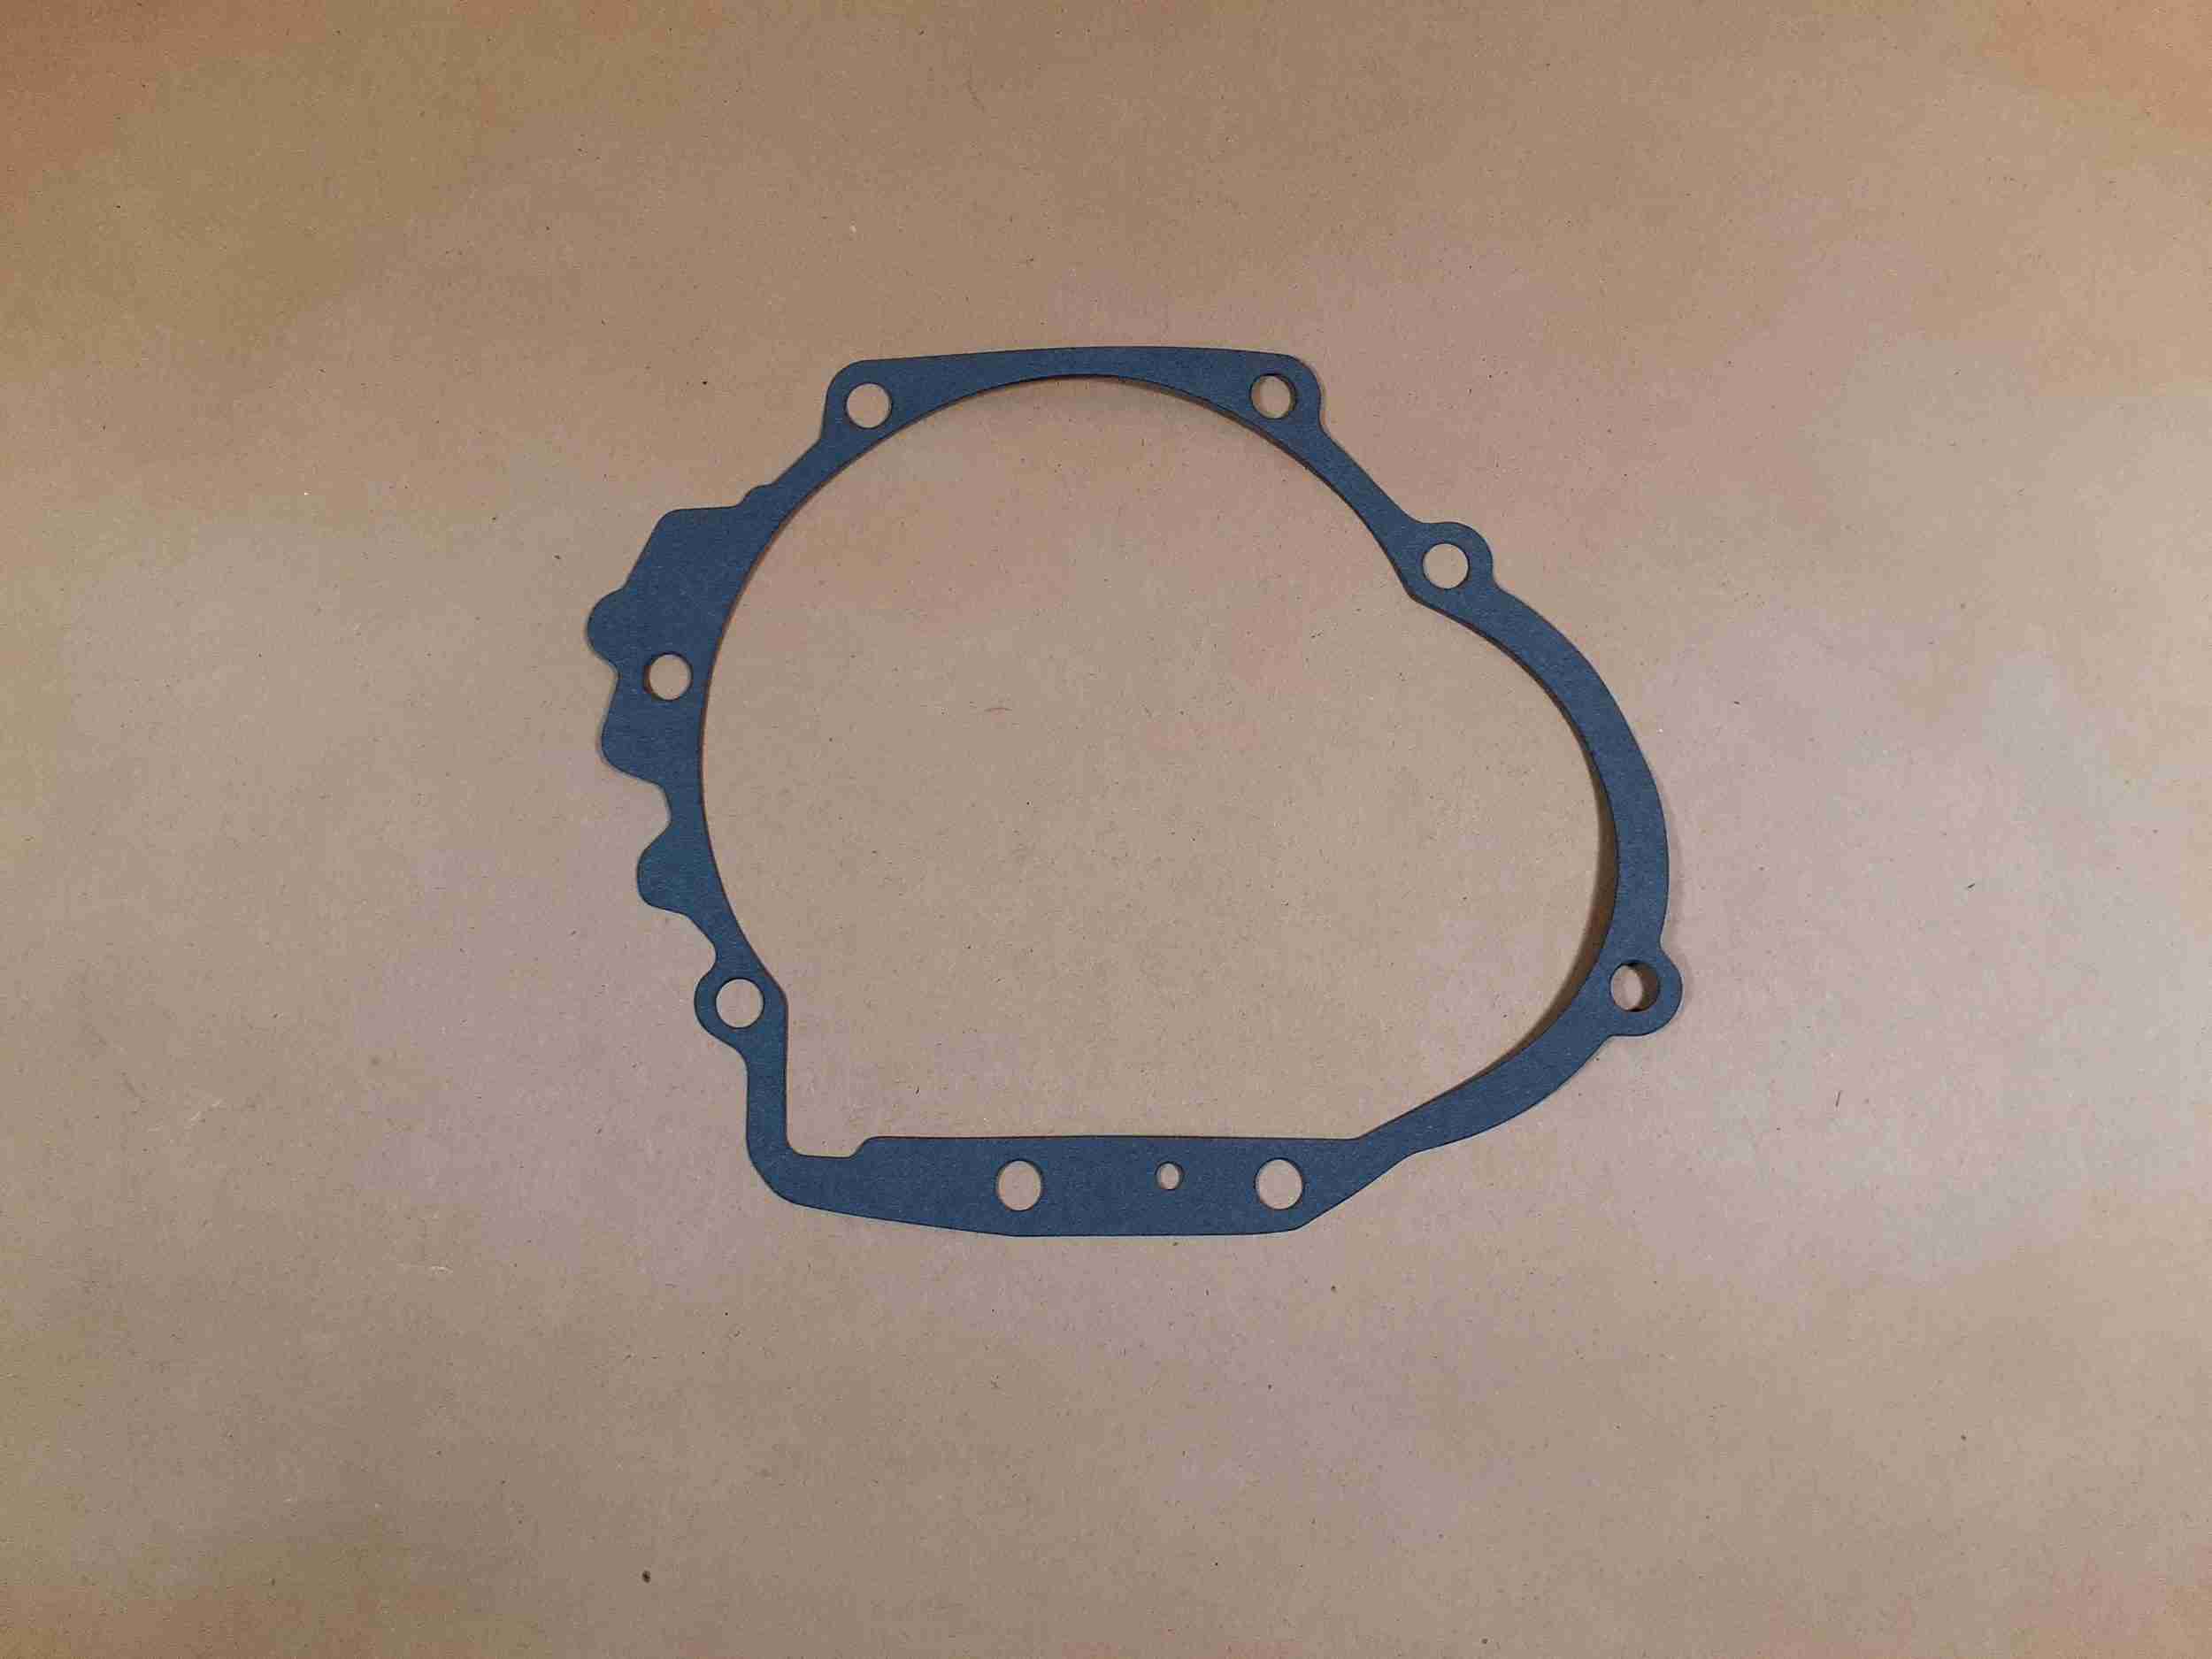 1956-64 Jetaway Automatic Transmission Rear Extension Gasket, 1956 Starchief, 1957-60 All, 1961-64 Bonneville & Starchief